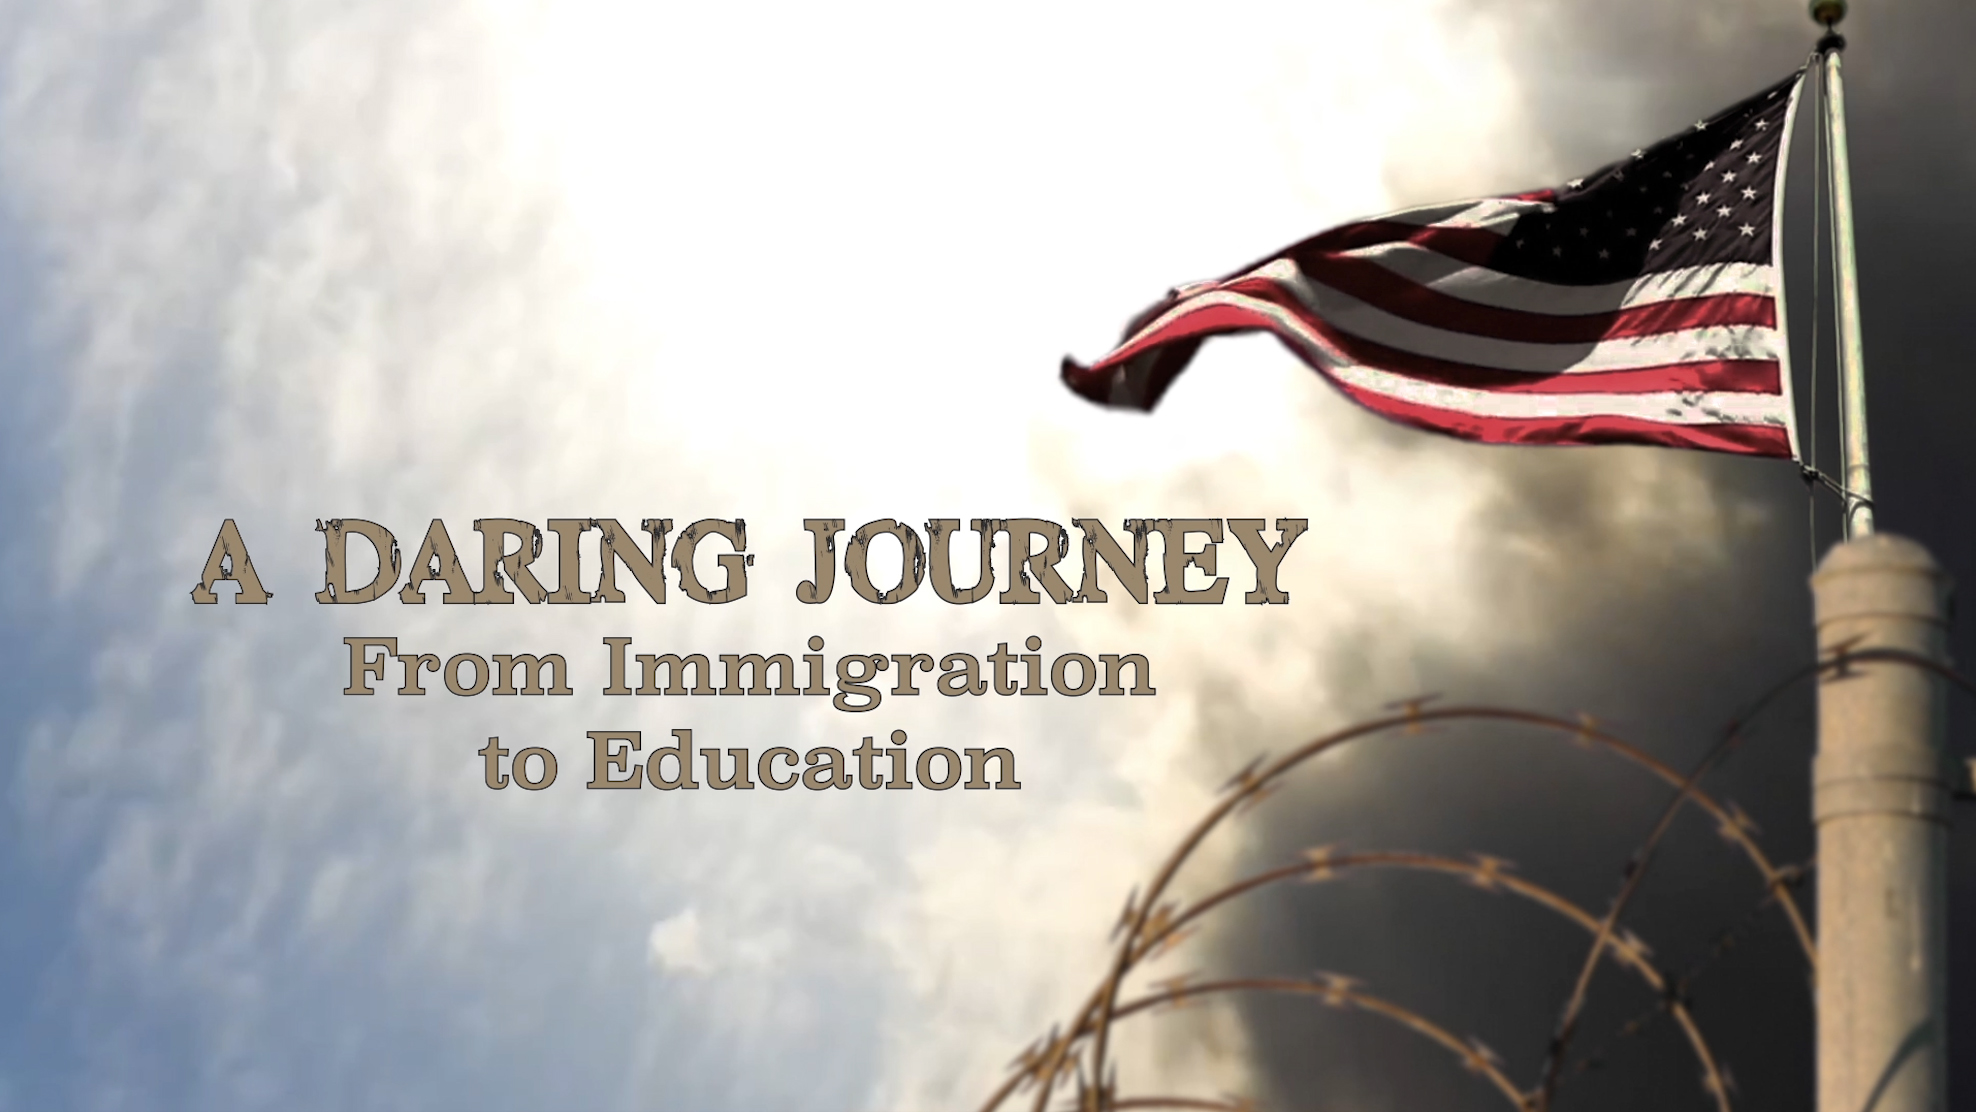 A Daring Journey: From Education to Immigration